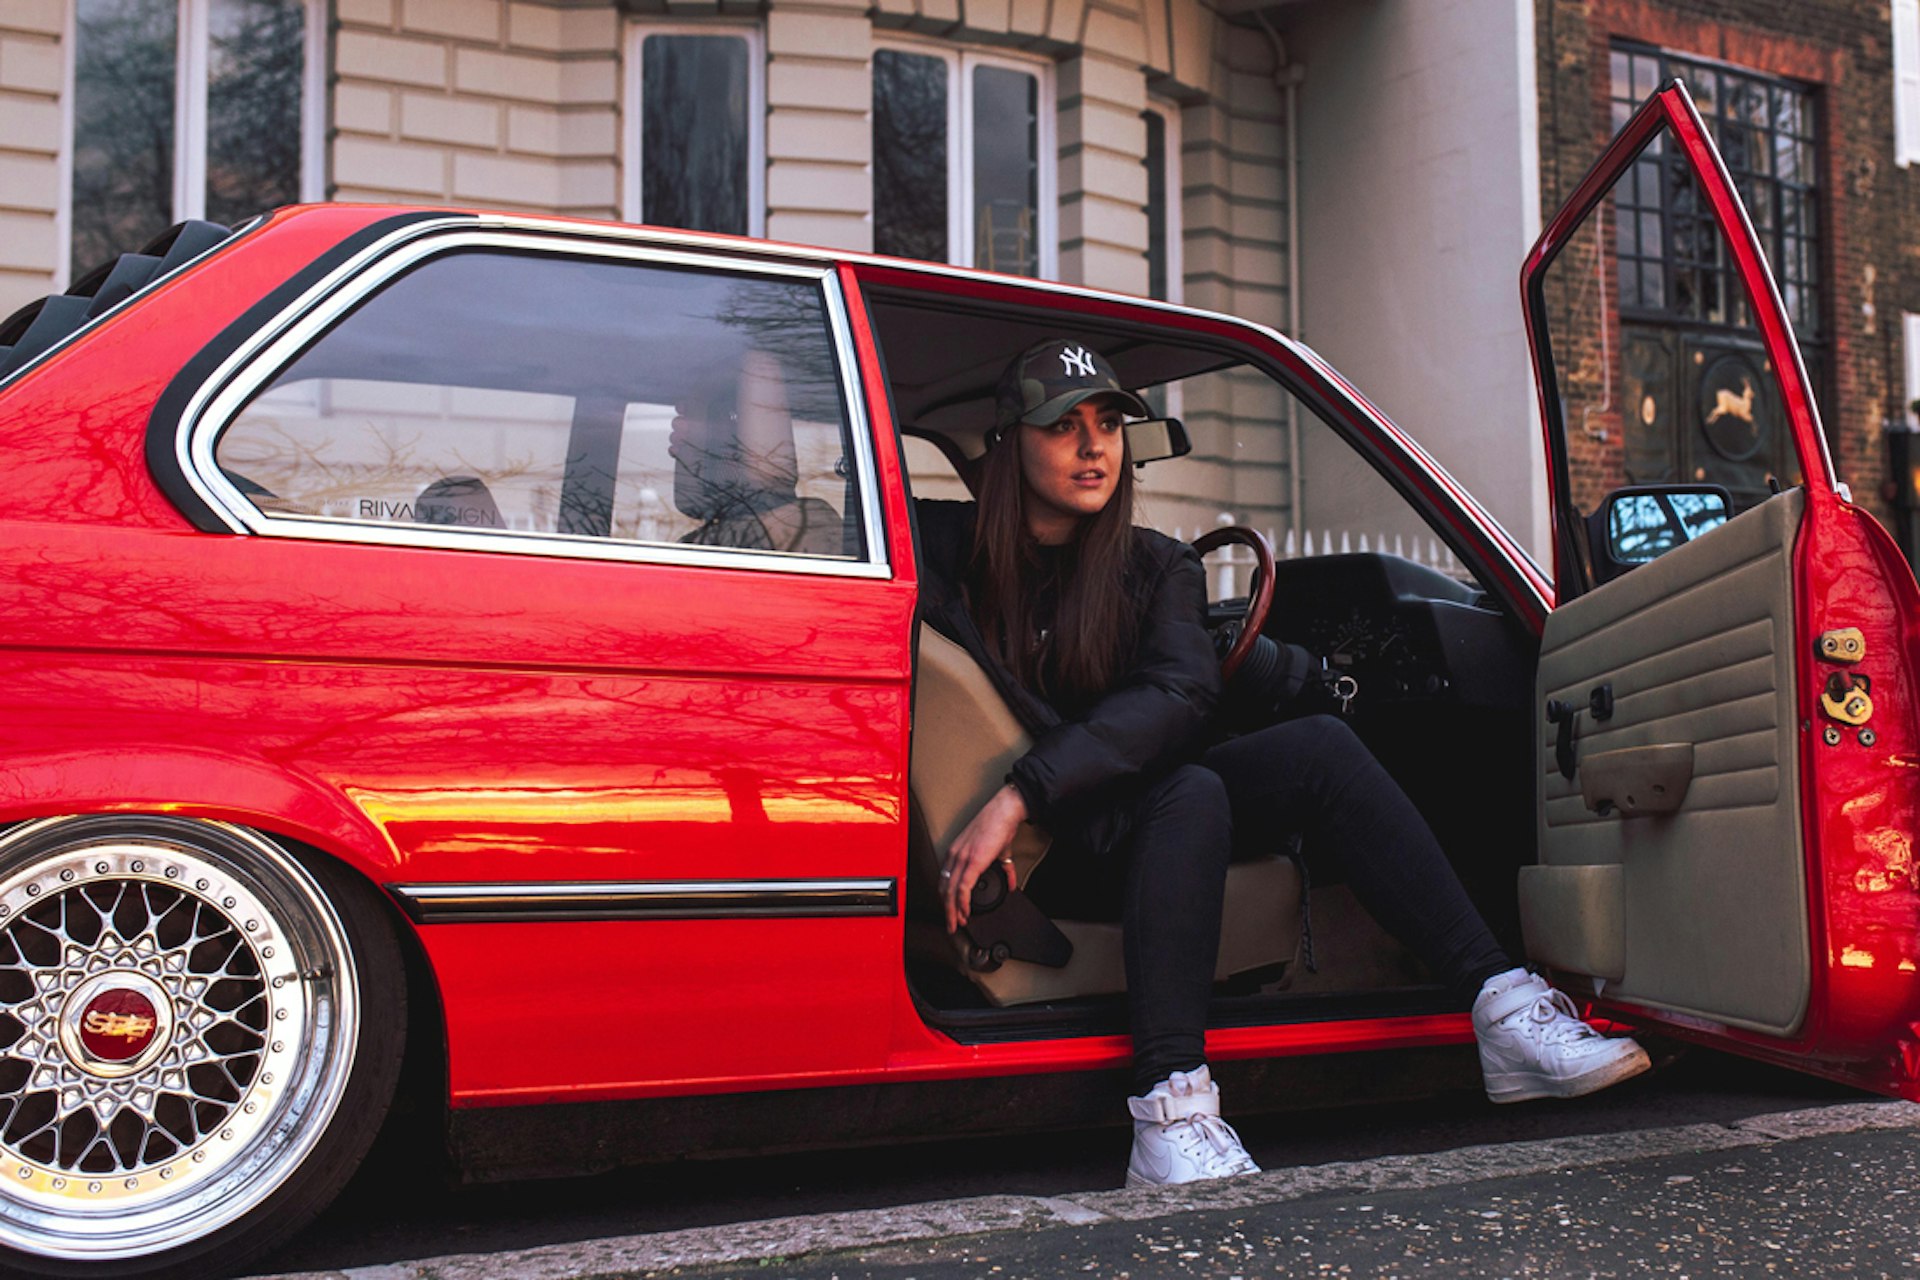 Meet Queen B, the face of car culture for a new generation